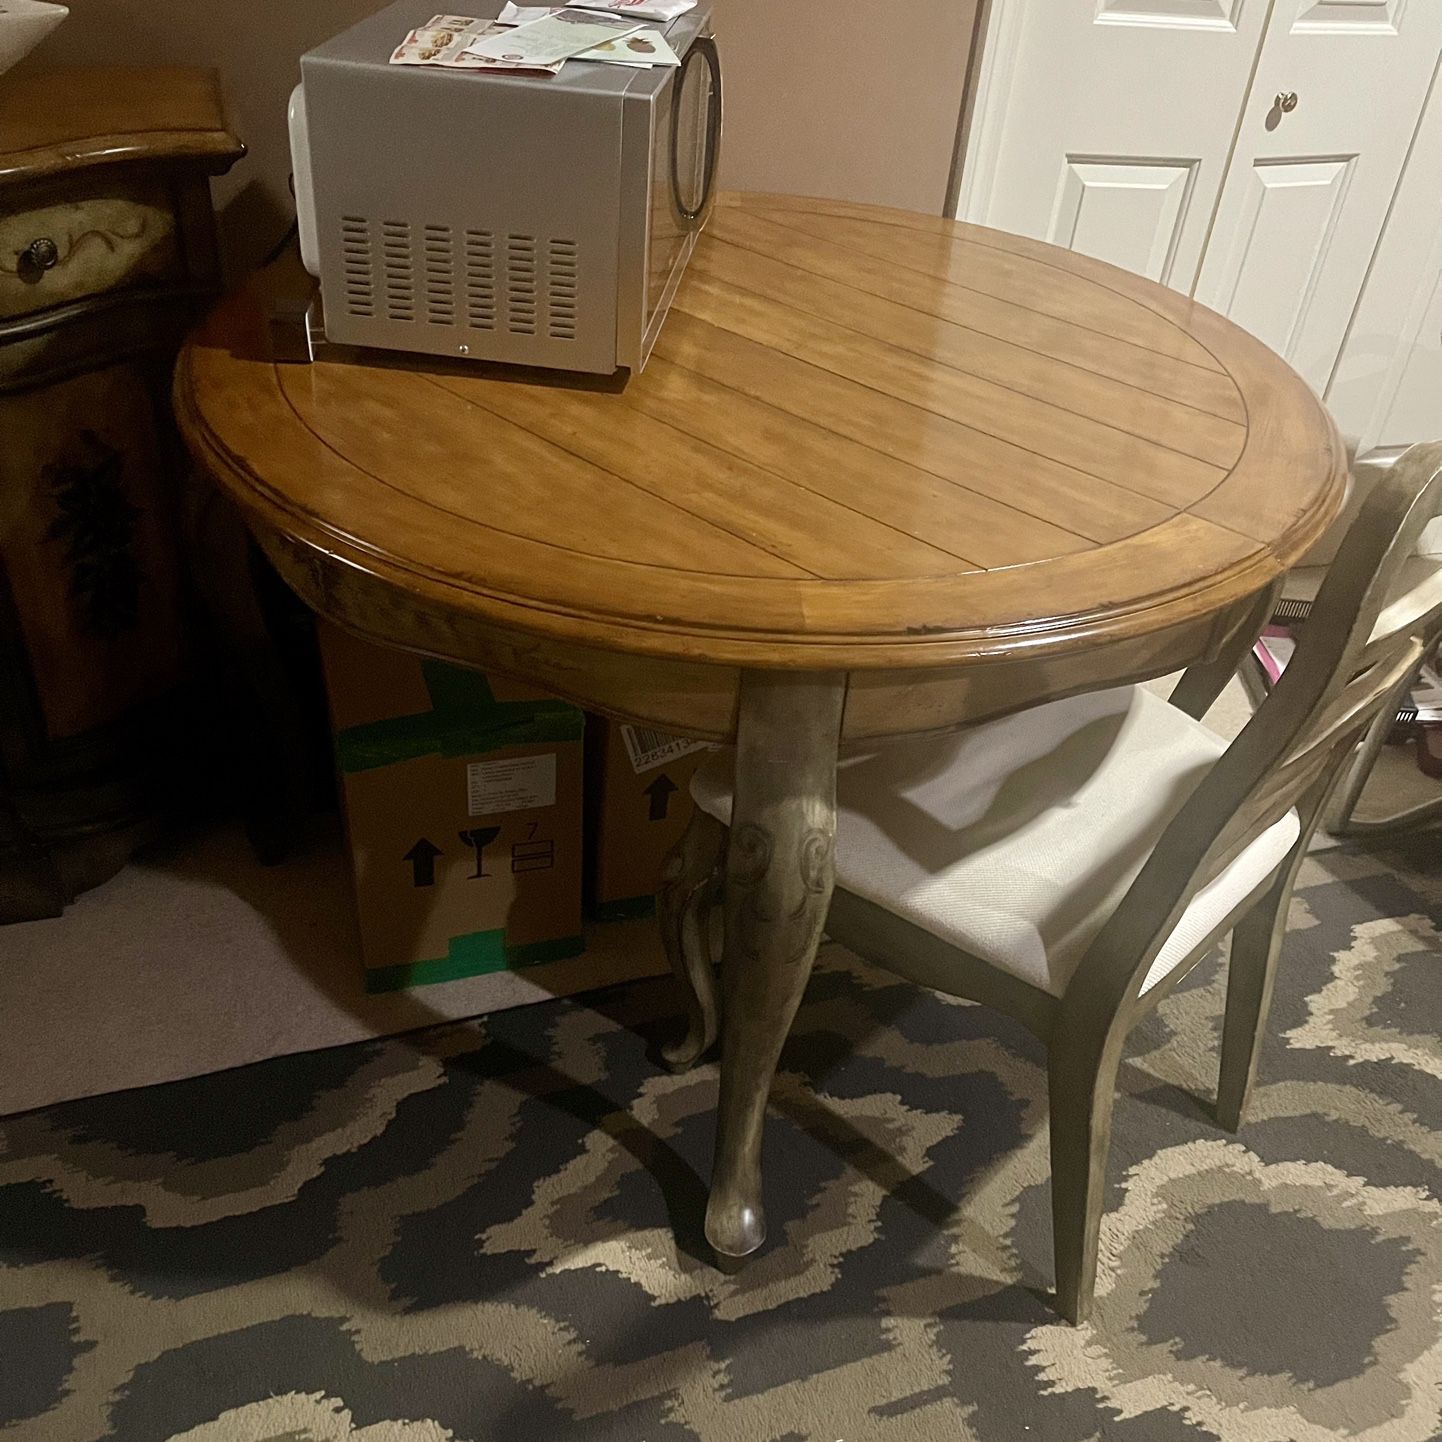 Designer Table For 4-6 Priced to Sell